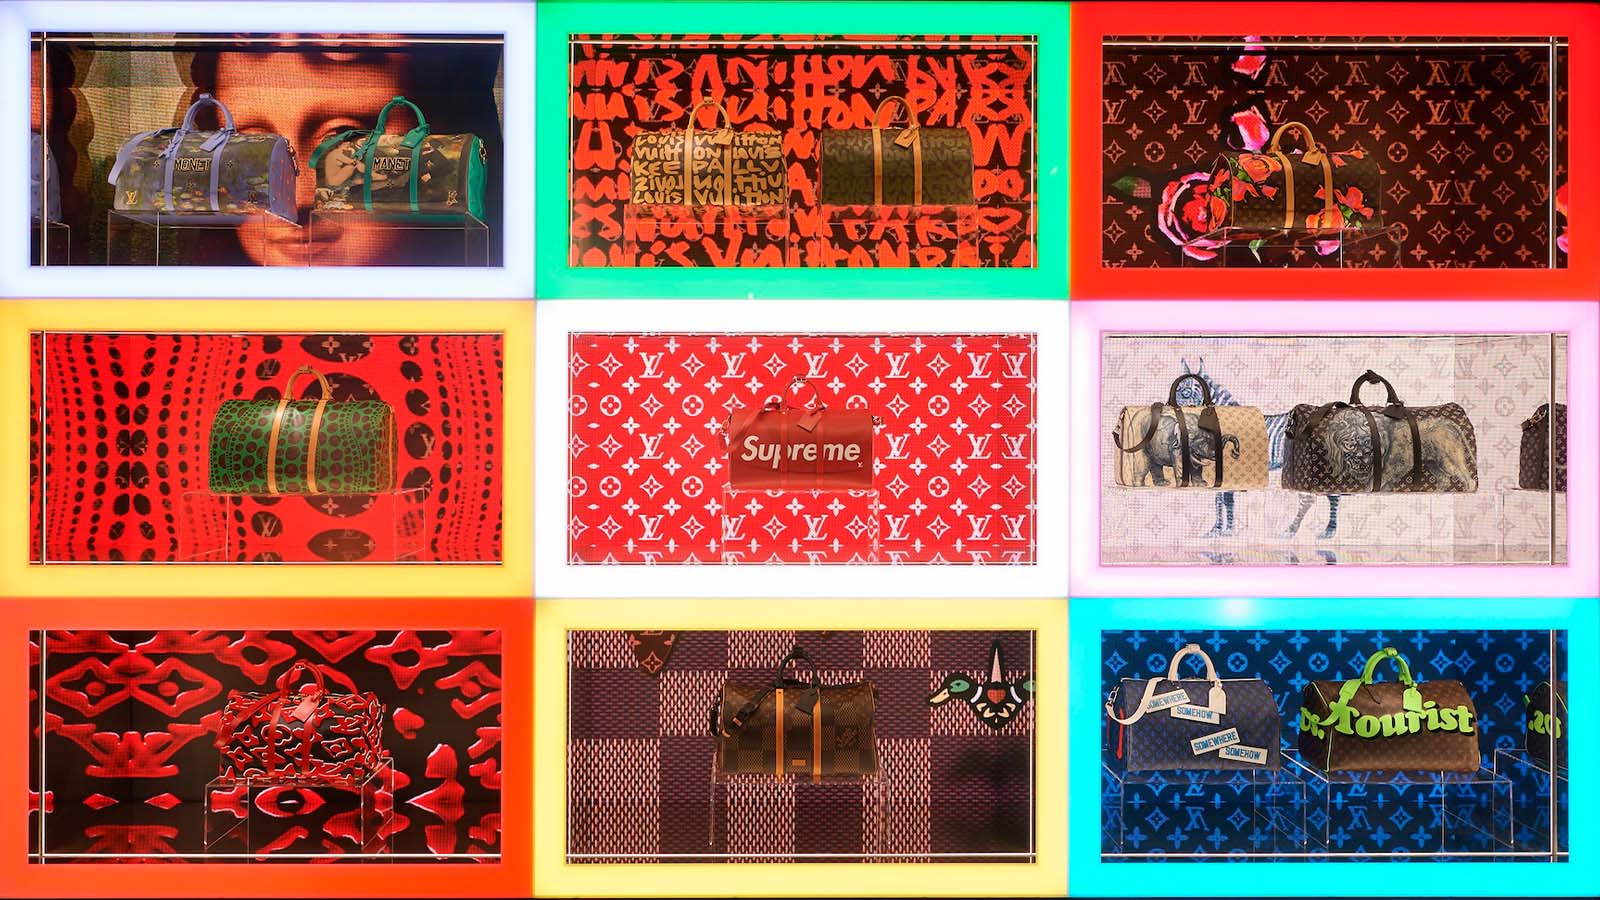 Louis Vuitton Builds on Its Legacy of Collaboration with New Artycapucines